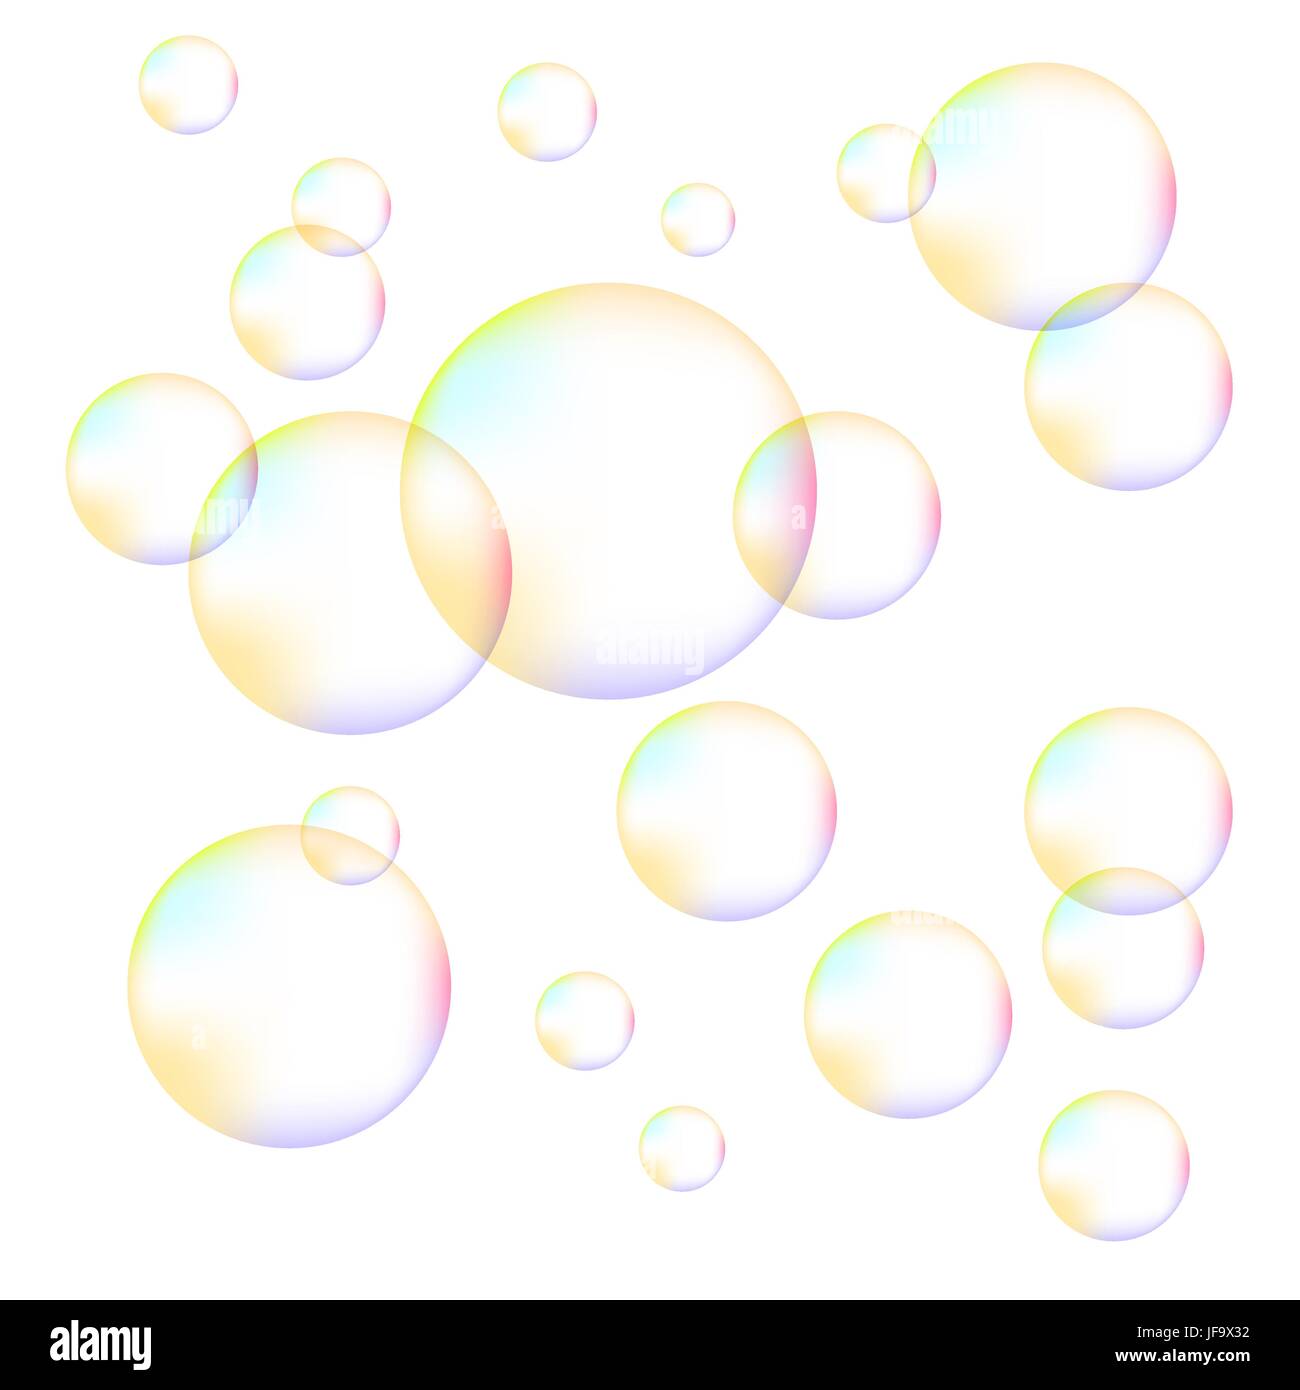 Transparent Colorful Foam Bubbles Isolated on White Background Stock Vector